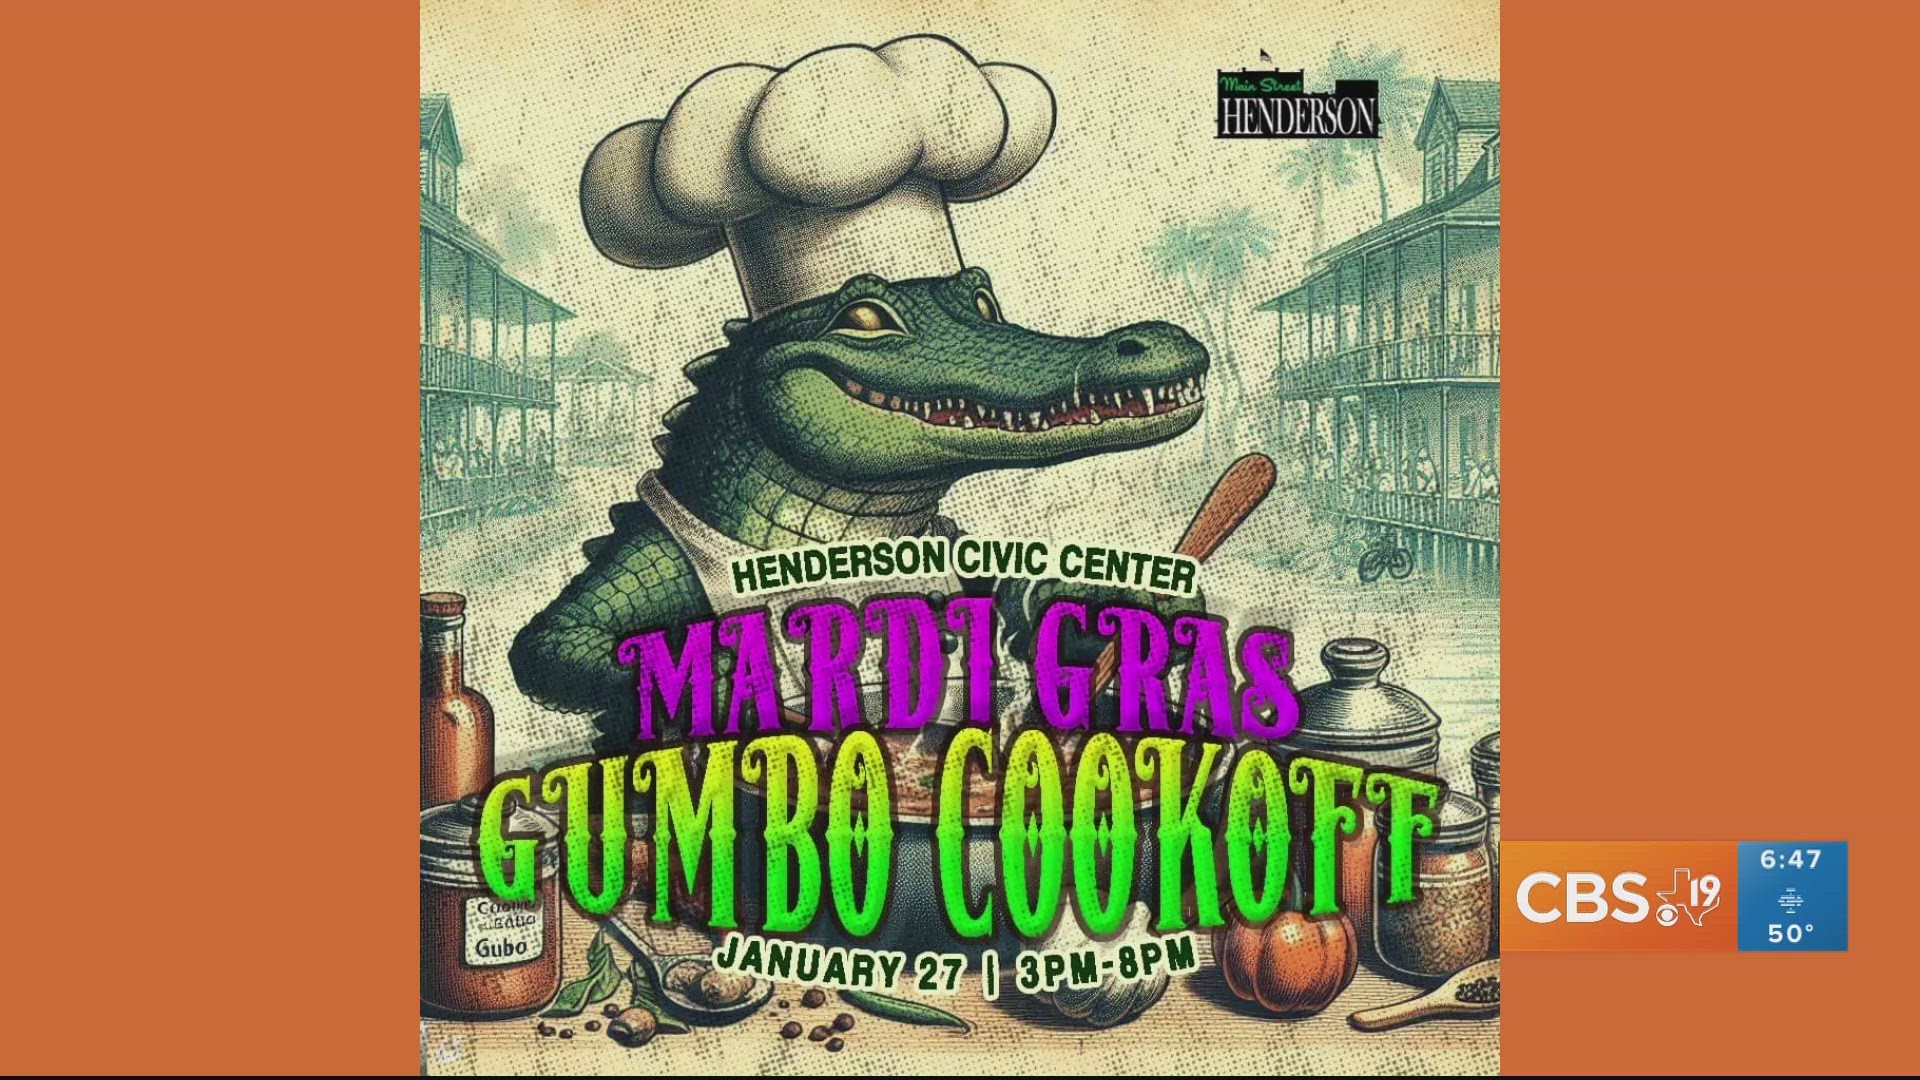 Henderson Civic Center to host Mardi Gras gumbo cookoff this weekend